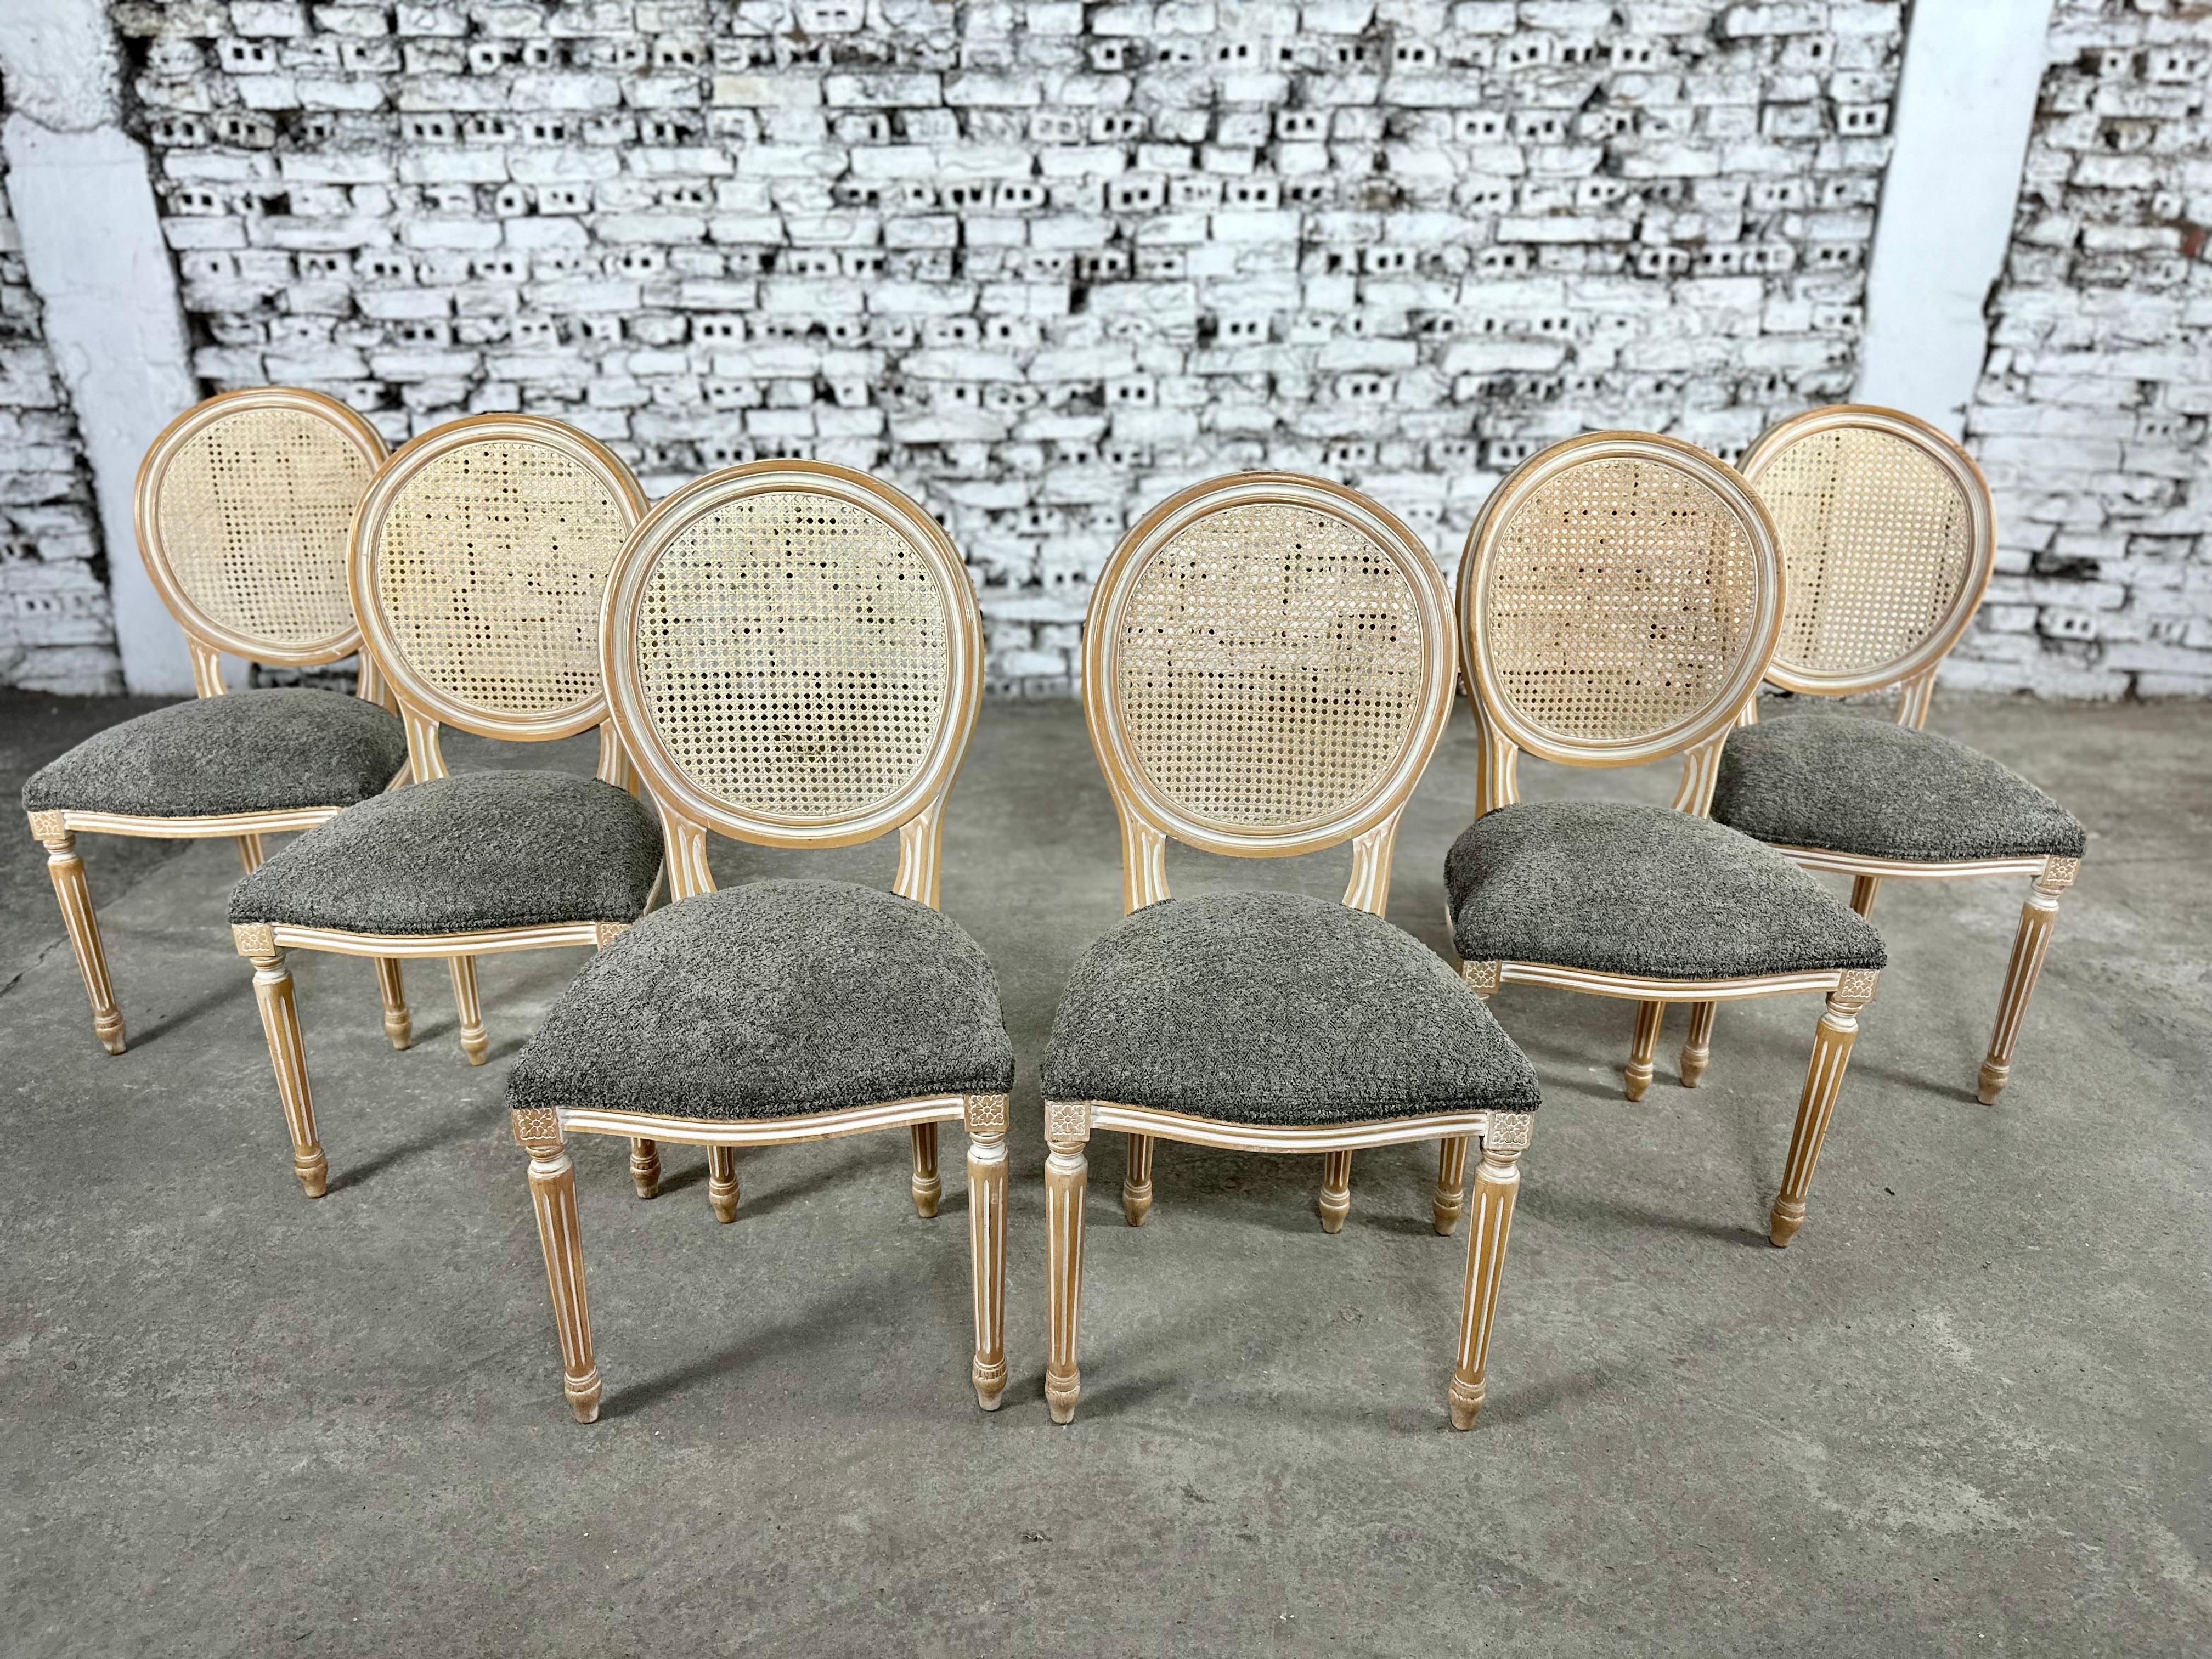 20th Century Louis XVI Medallion Cane Back Dining Chairs, Reupholstered - Set of 6